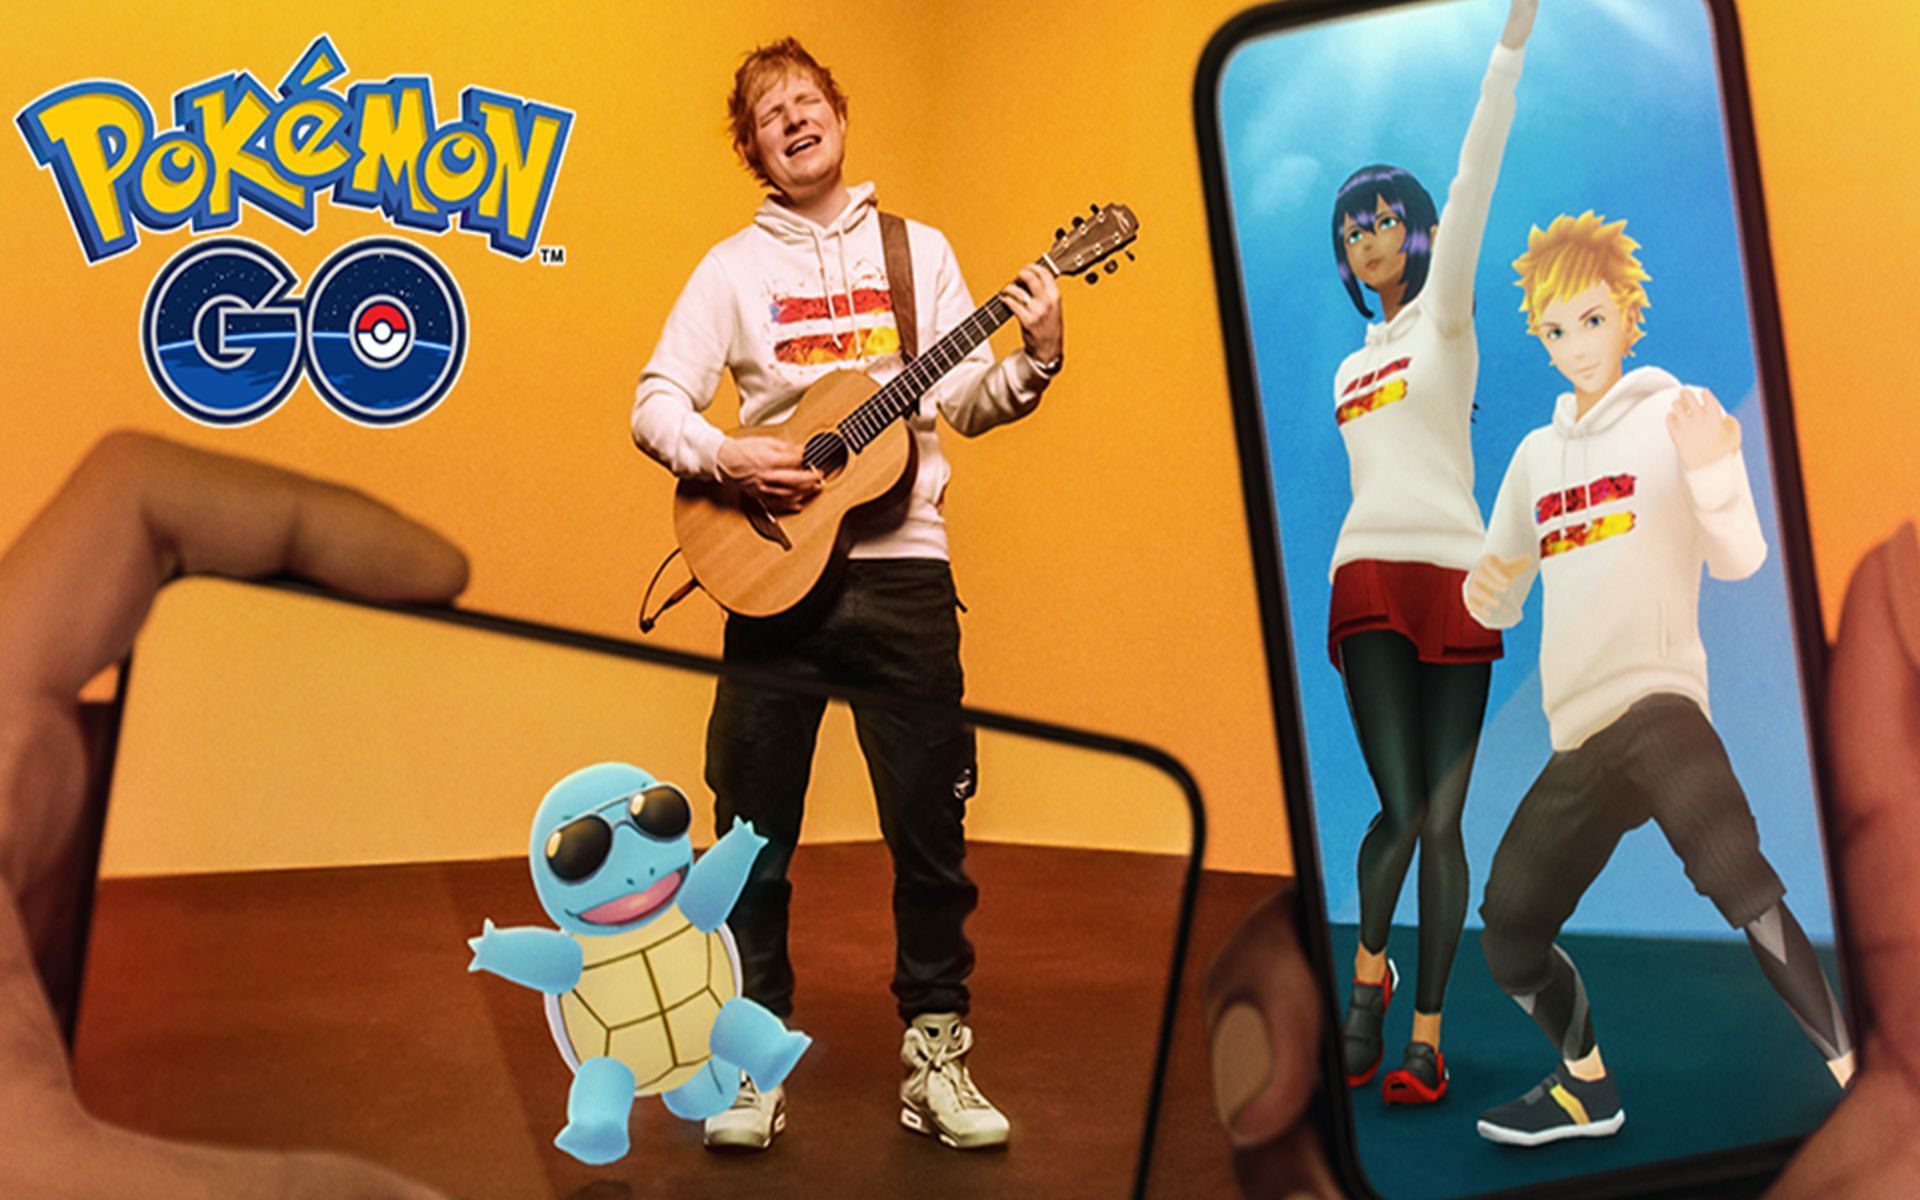 Squirtle with sunglasses is being featured as part of the Ed Sheeran event (Image via Niantic)